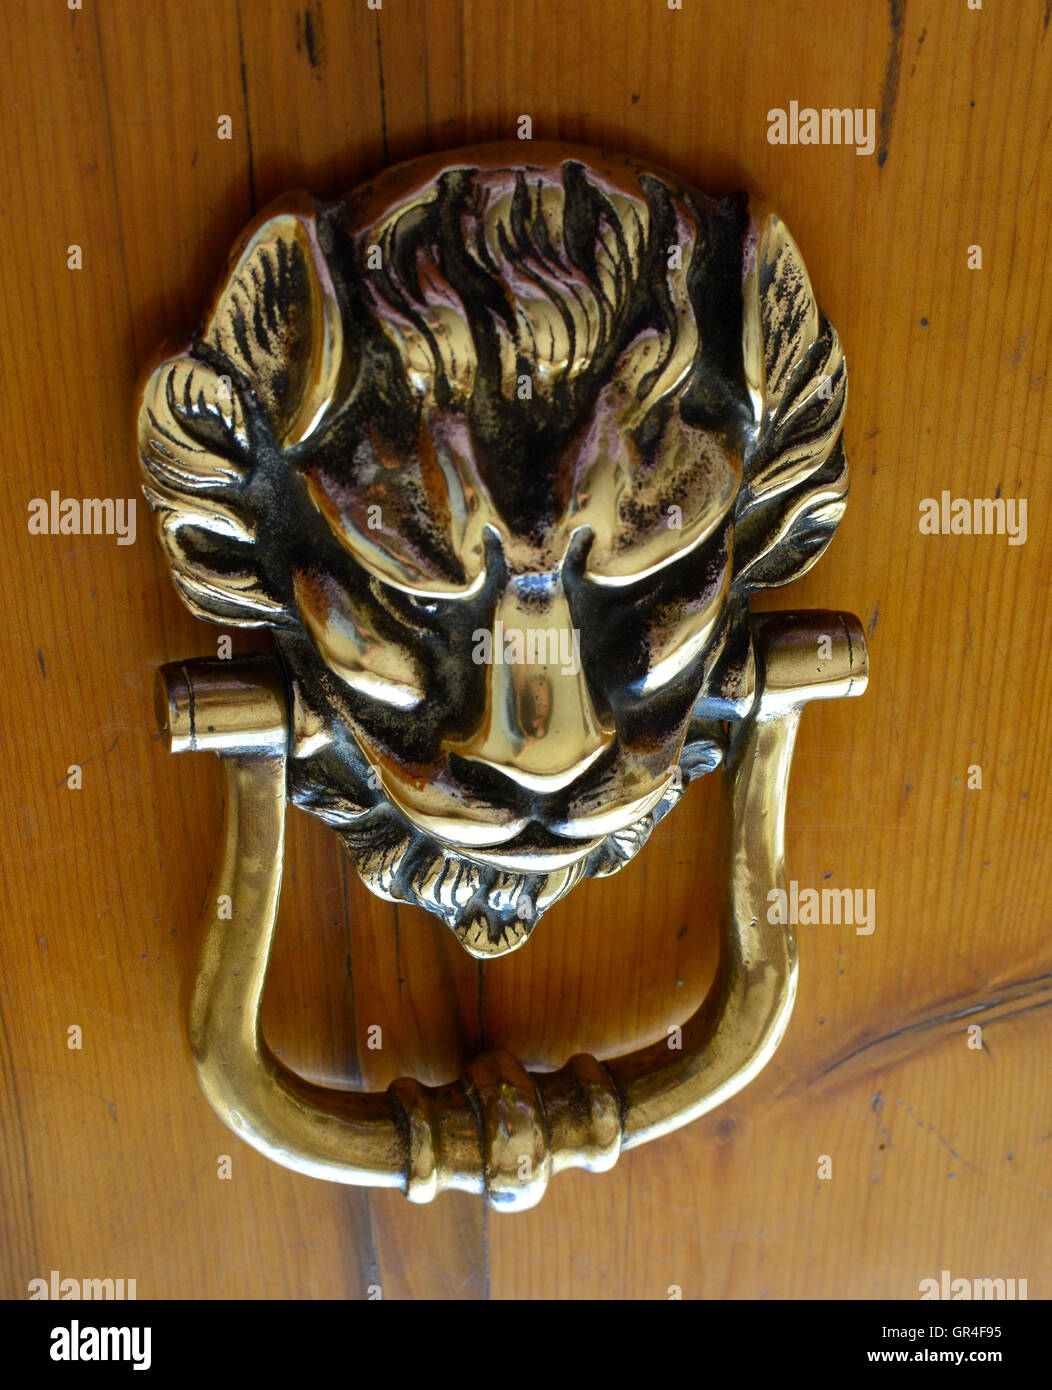 Copper lion head knocker on oregon pine wood. Welcome. Come on in. Knocking on my door. Come knocking. Knock on wood. Down view. Stock Photo